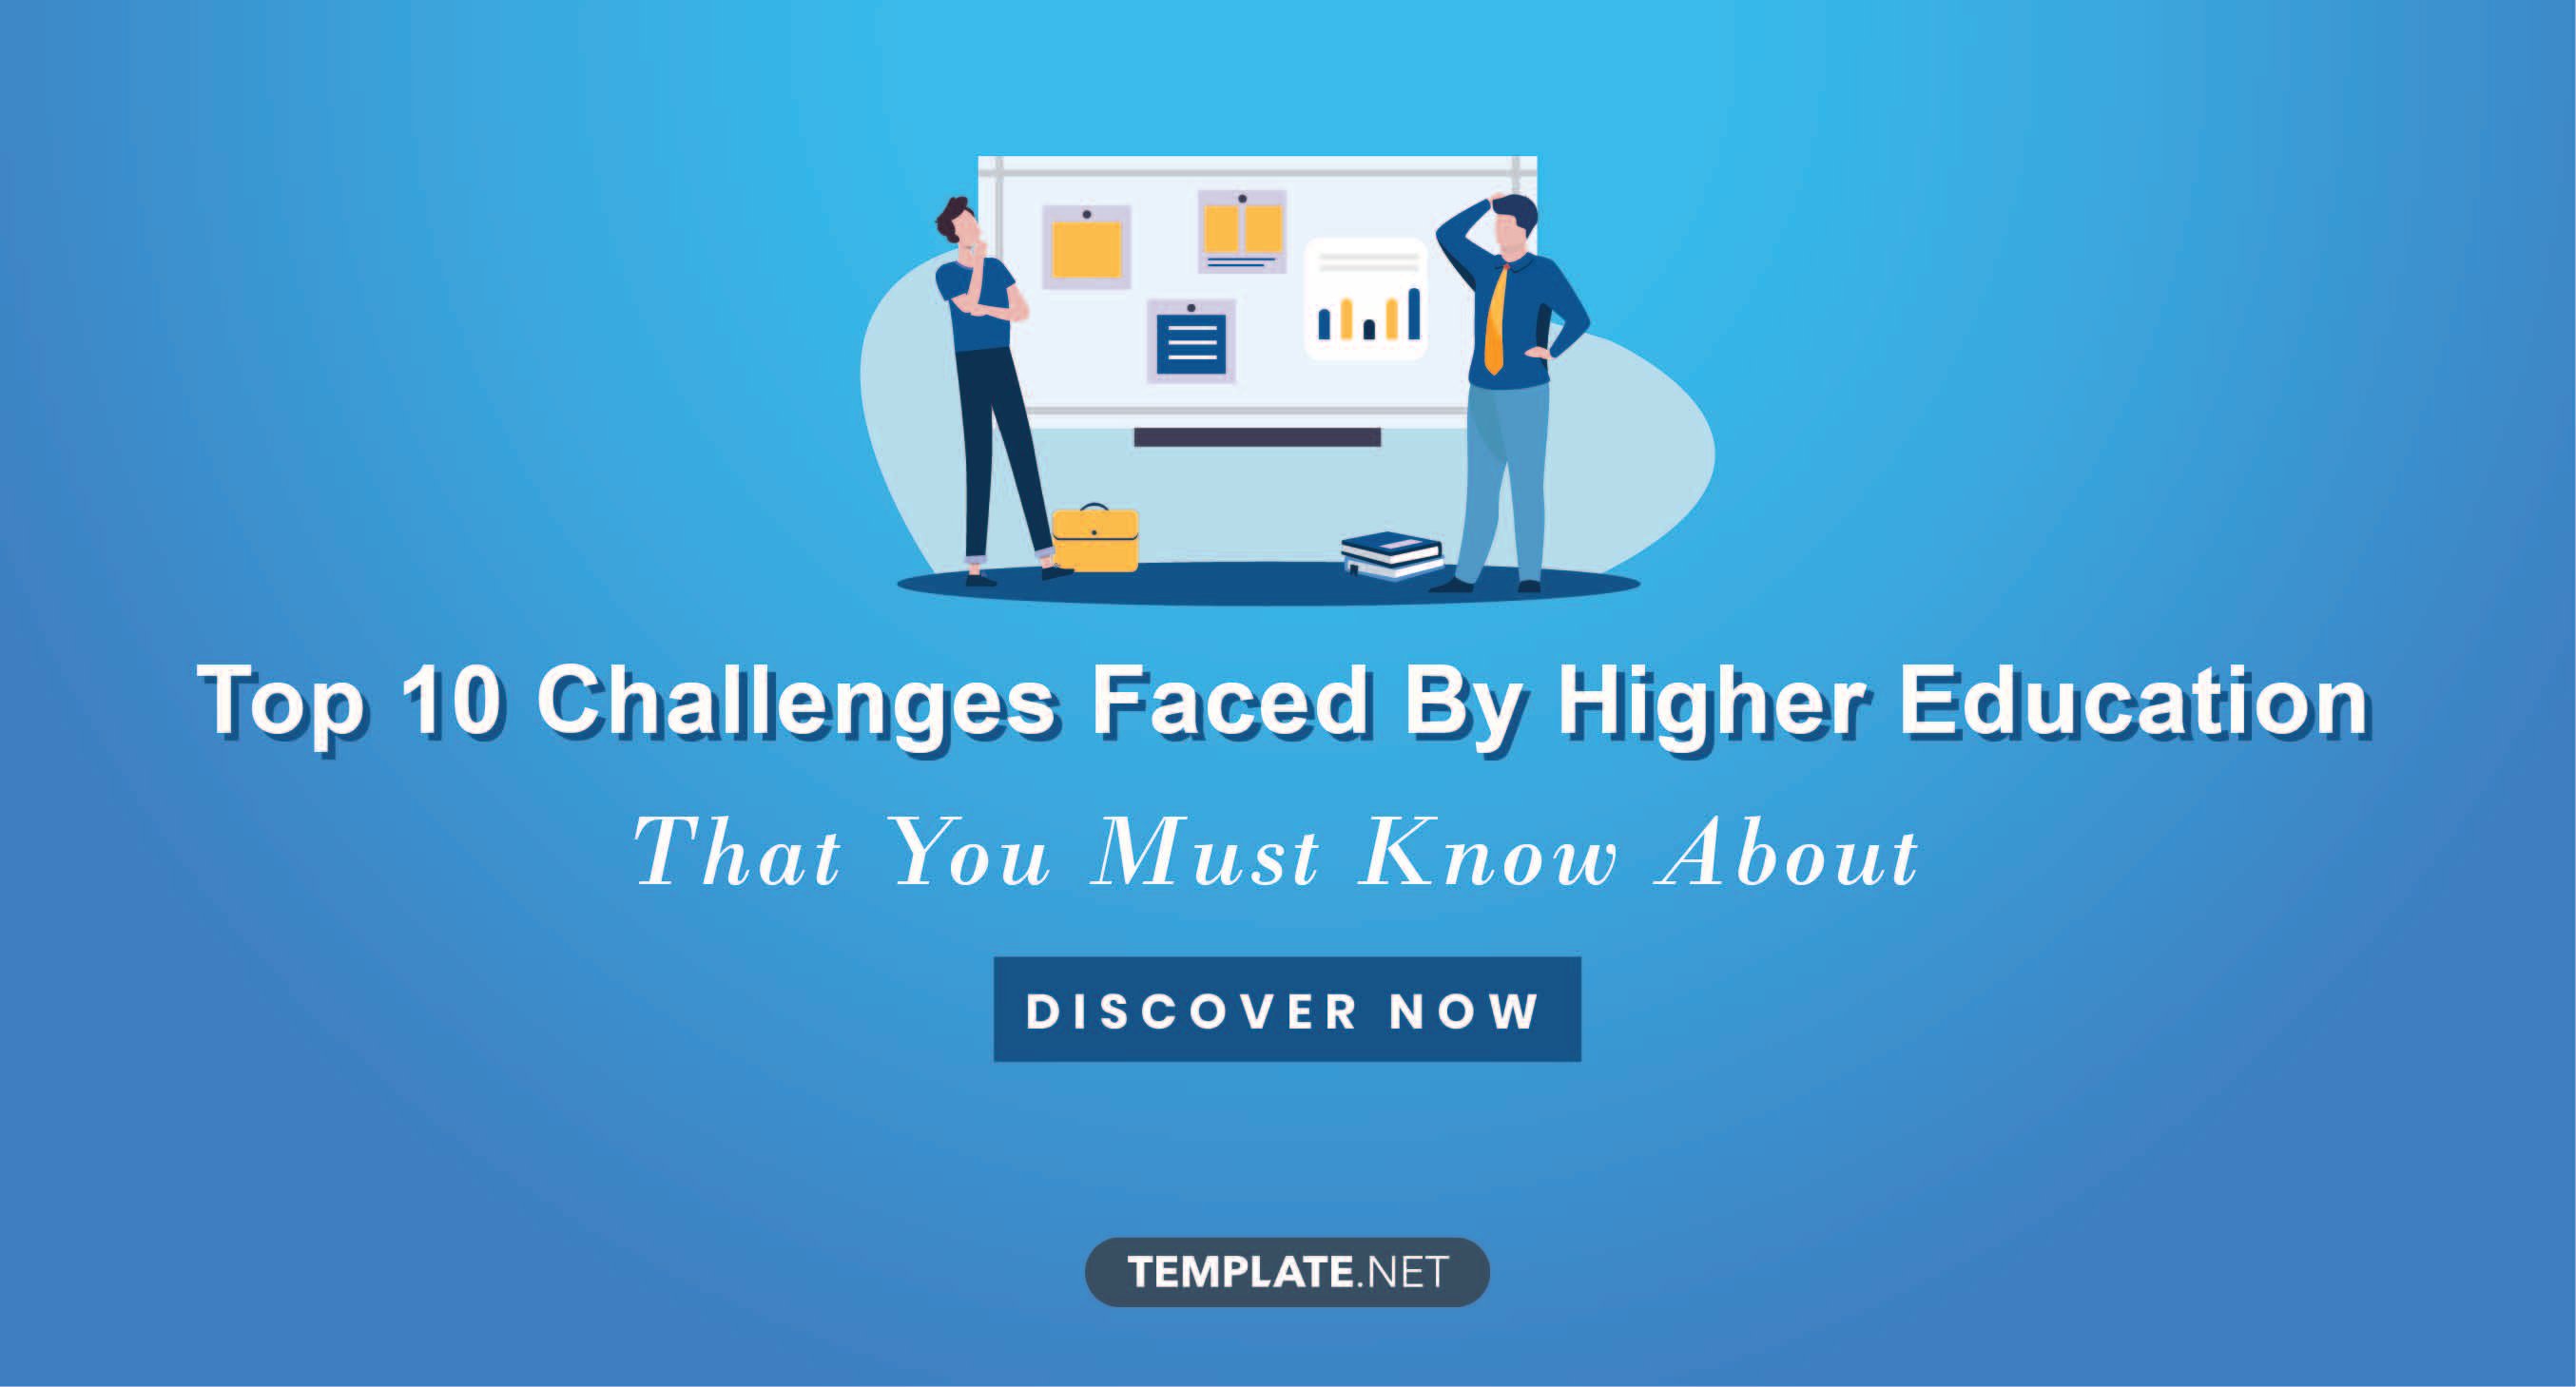 challenges in higher education administration